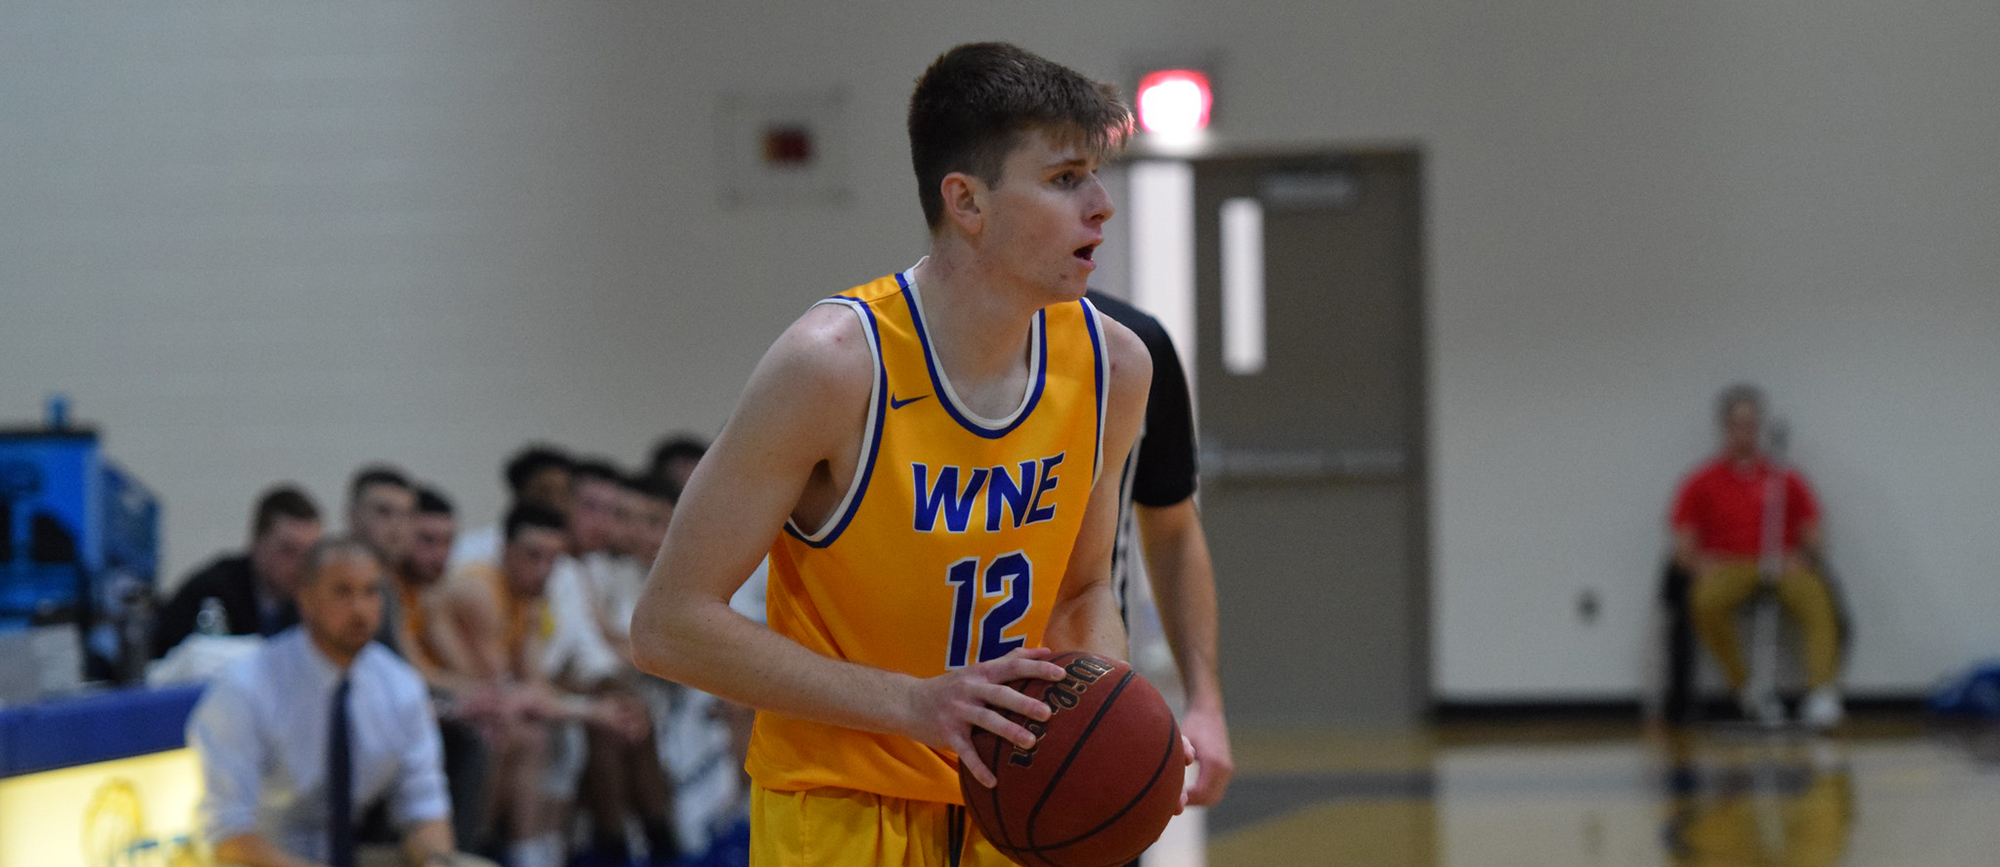 Kenny Flynn scored 20 points off the bench for the Golden Bears in the win over Gordon. (Photo by Rachael Margossian)